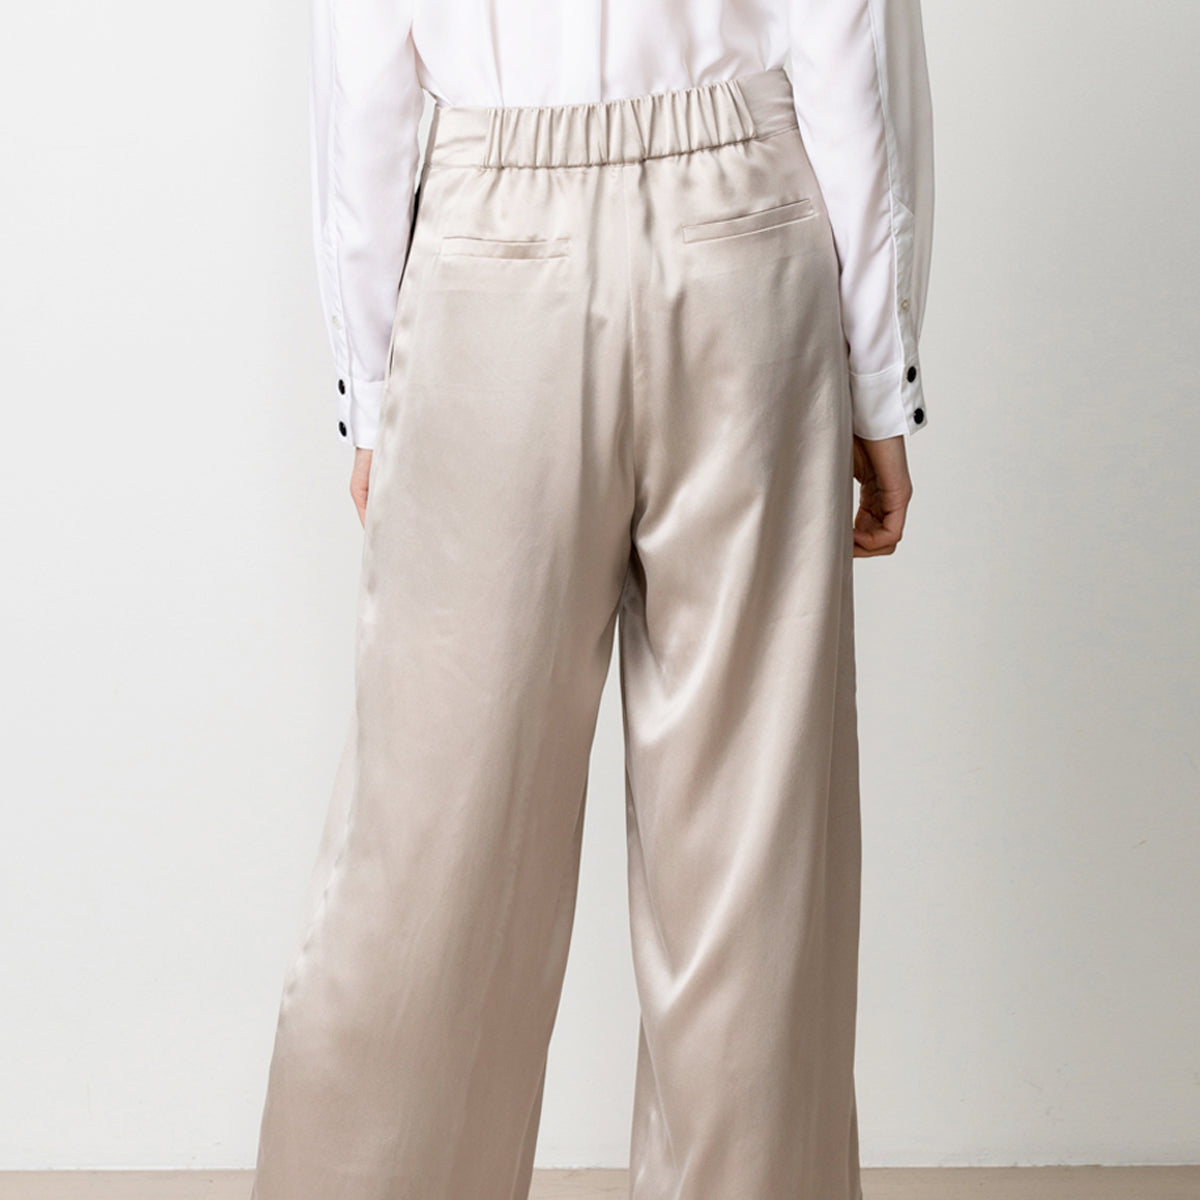 Freedom trousers silk charmeuse cropped greige